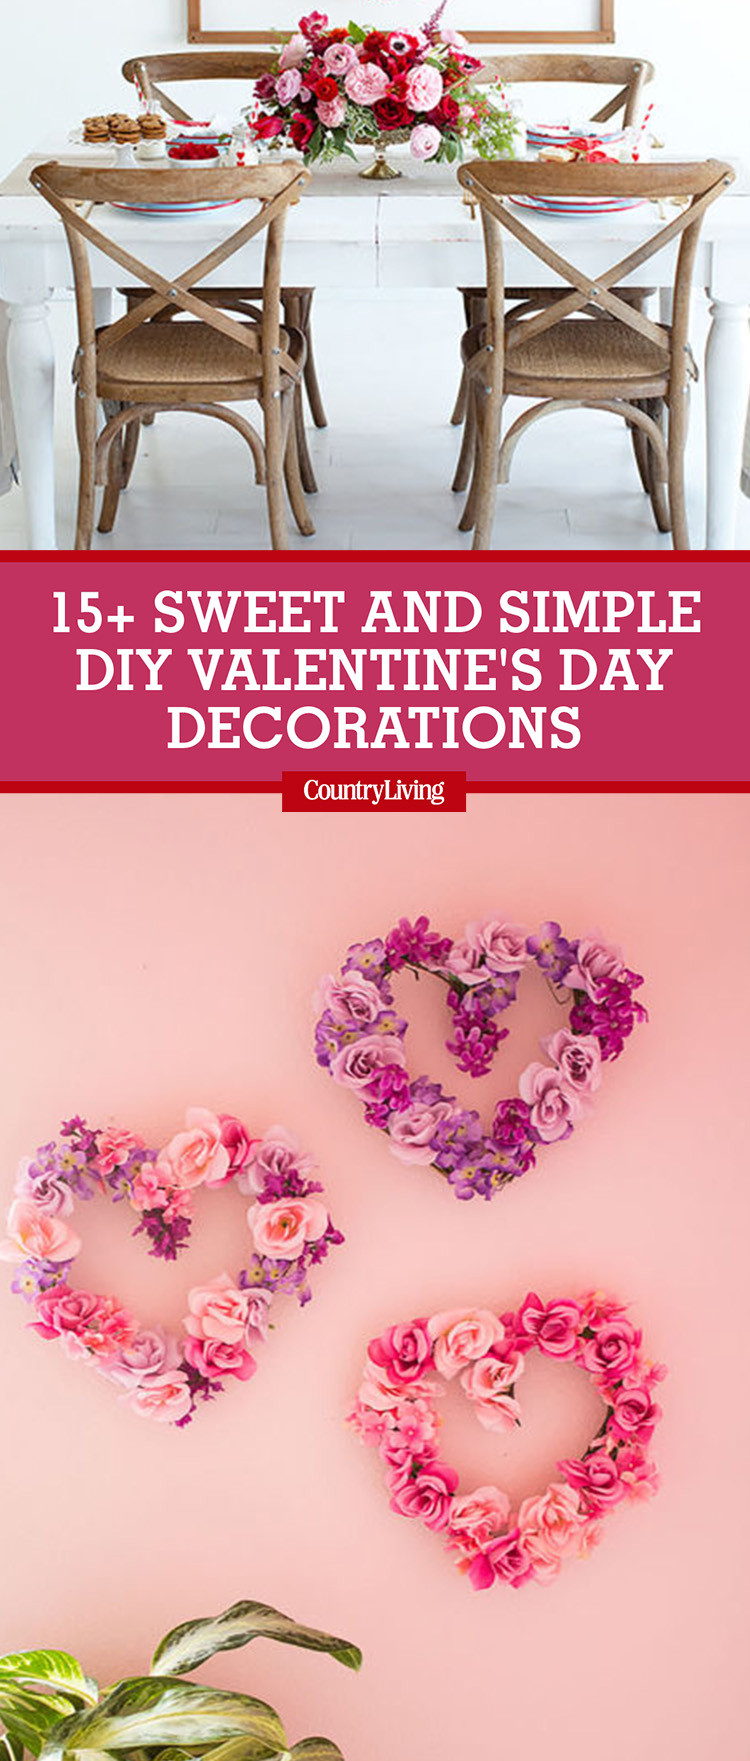 Valentines Decorations DIY
 18 Sweet and Simple DIY Valentine s Day Decorations